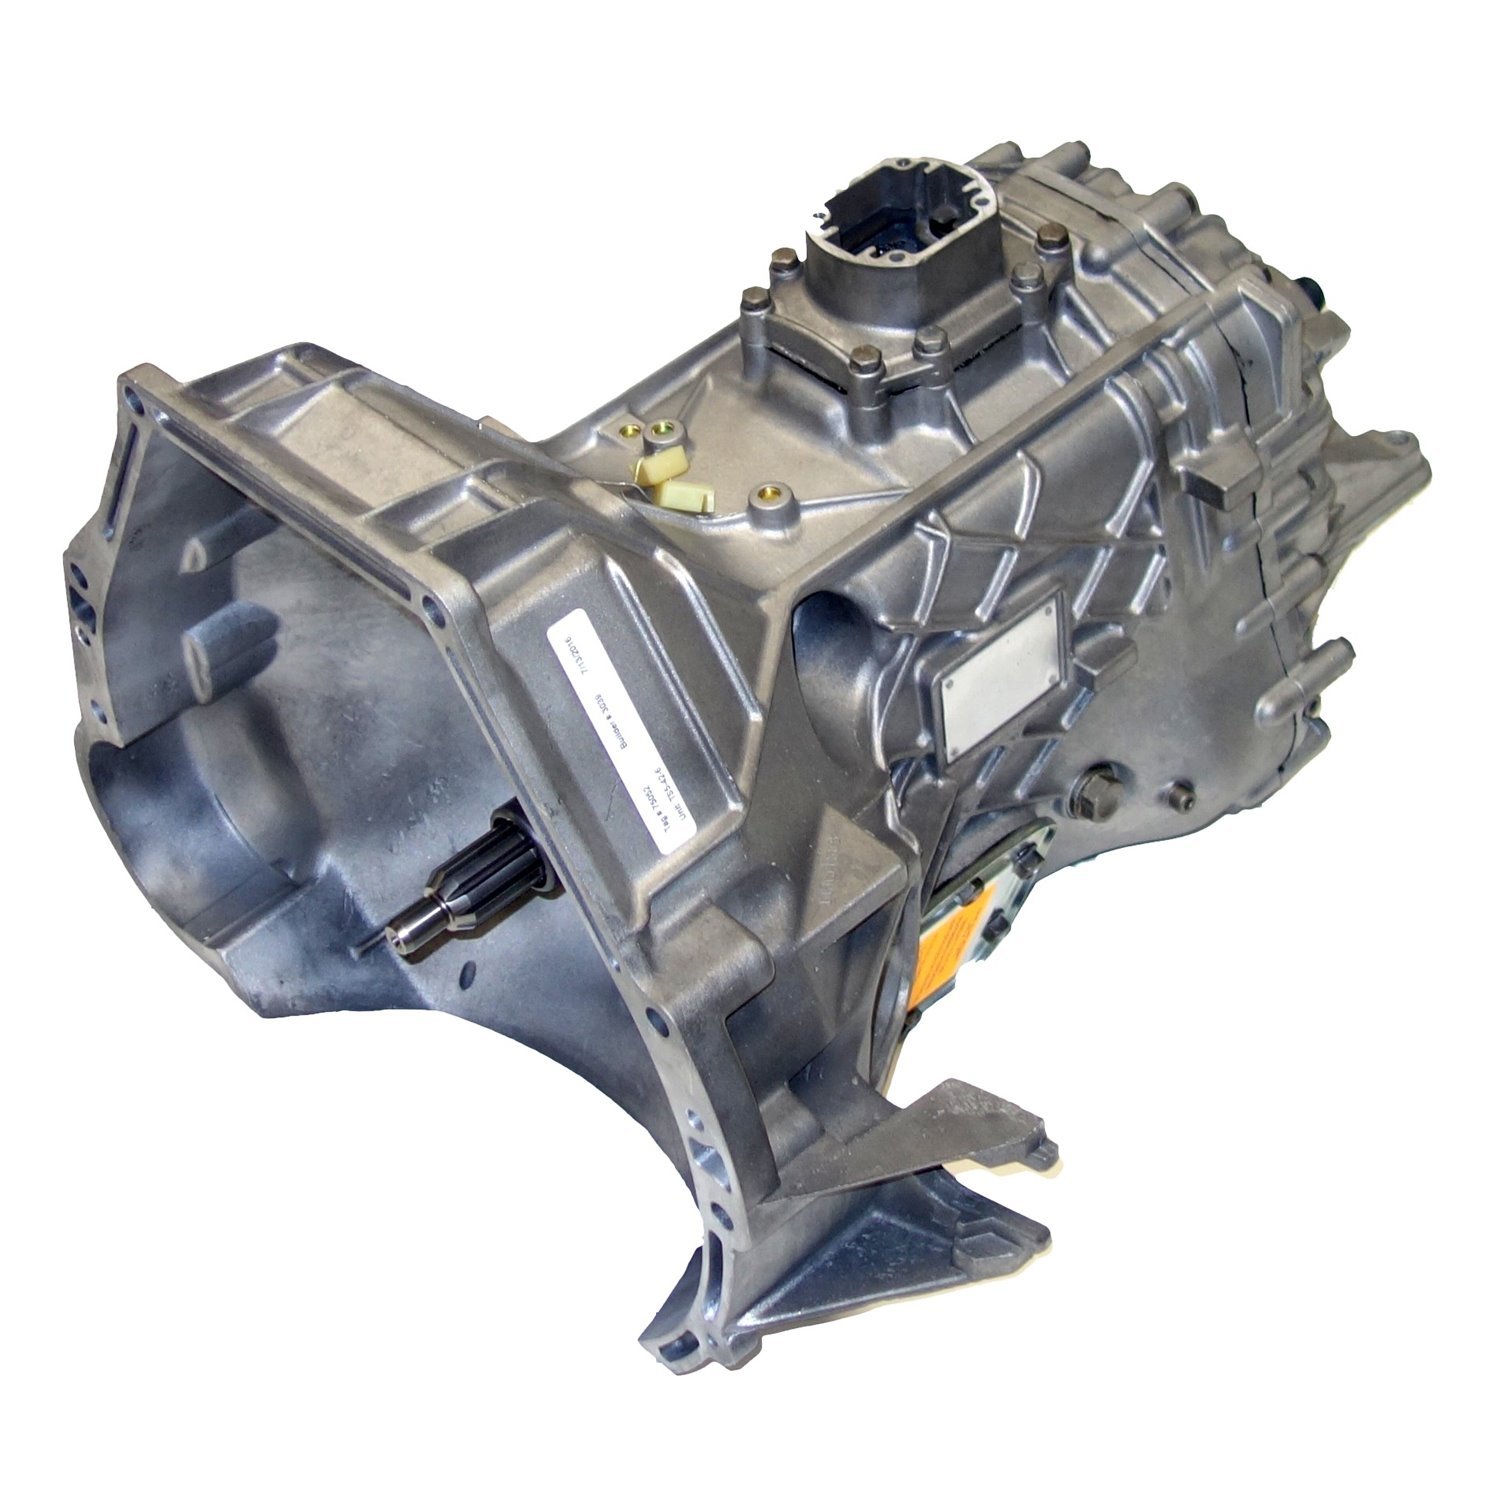 Remanufactured S5-42 Manual Transmission for Ford 92-94 F-series 7.5L, 5 Speed